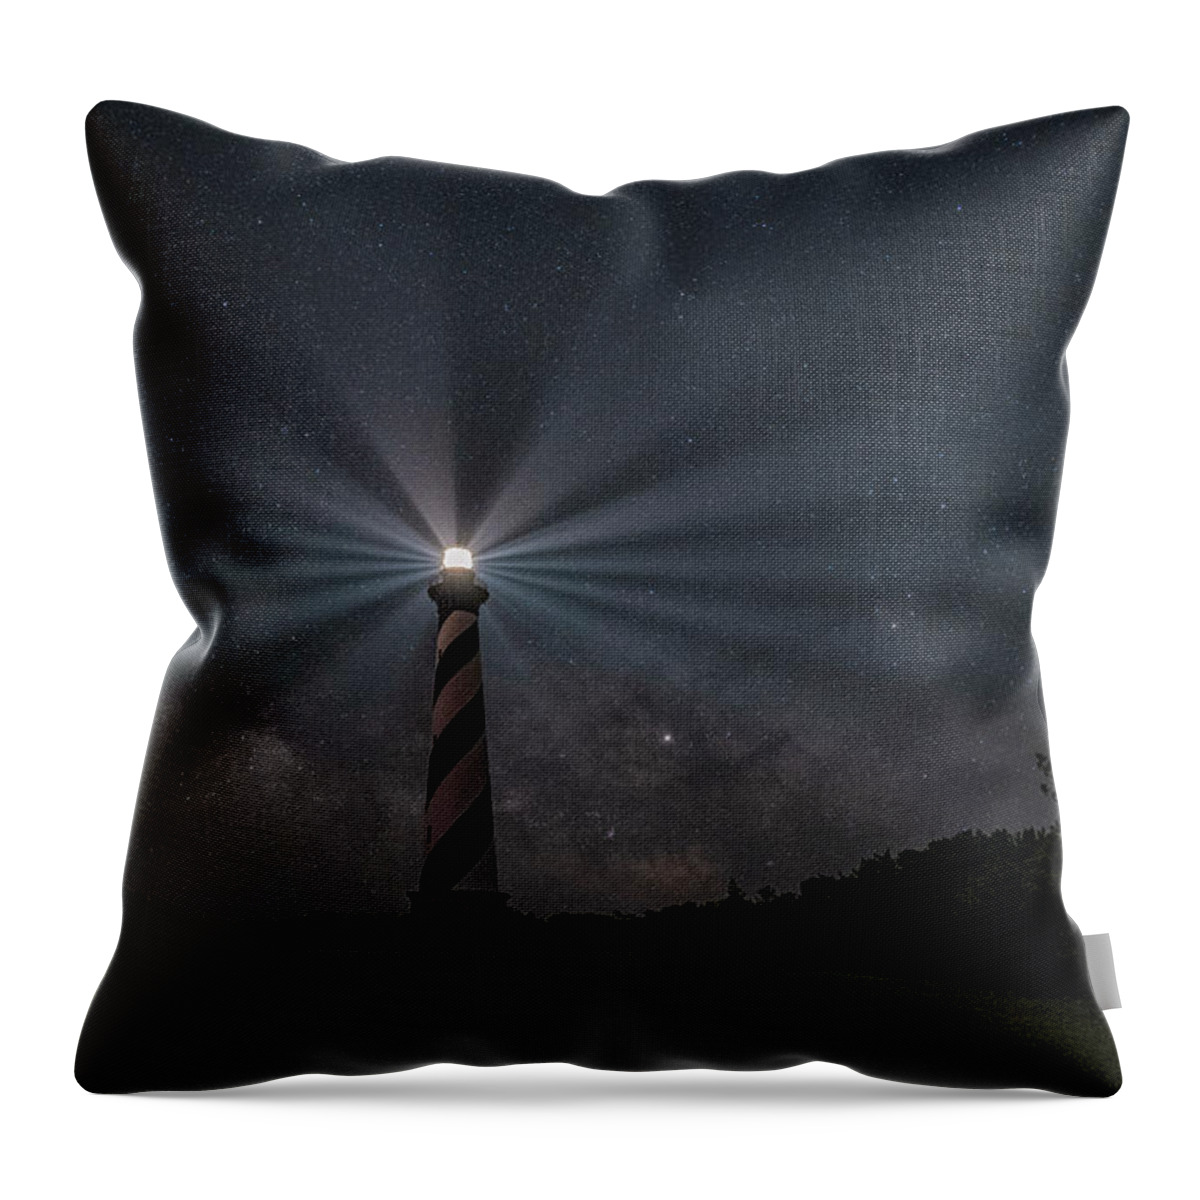 North Carolina Throw Pillow featuring the photograph See The Light #5 by Robert Fawcett